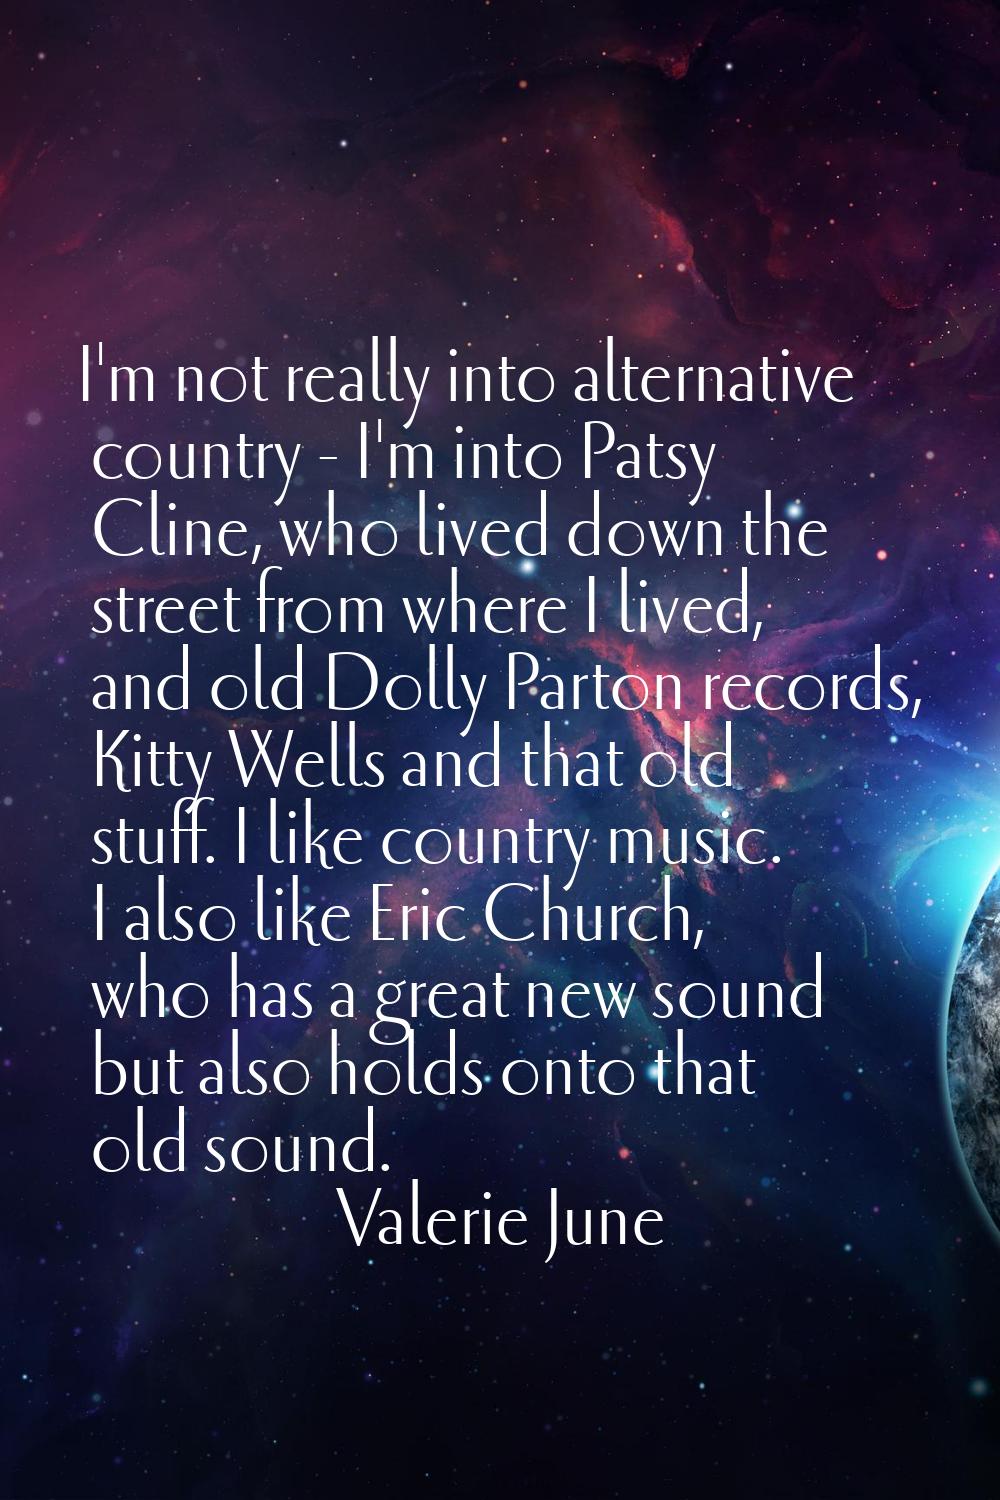 I'm not really into alternative country - I'm into Patsy Cline, who lived down the street from wher